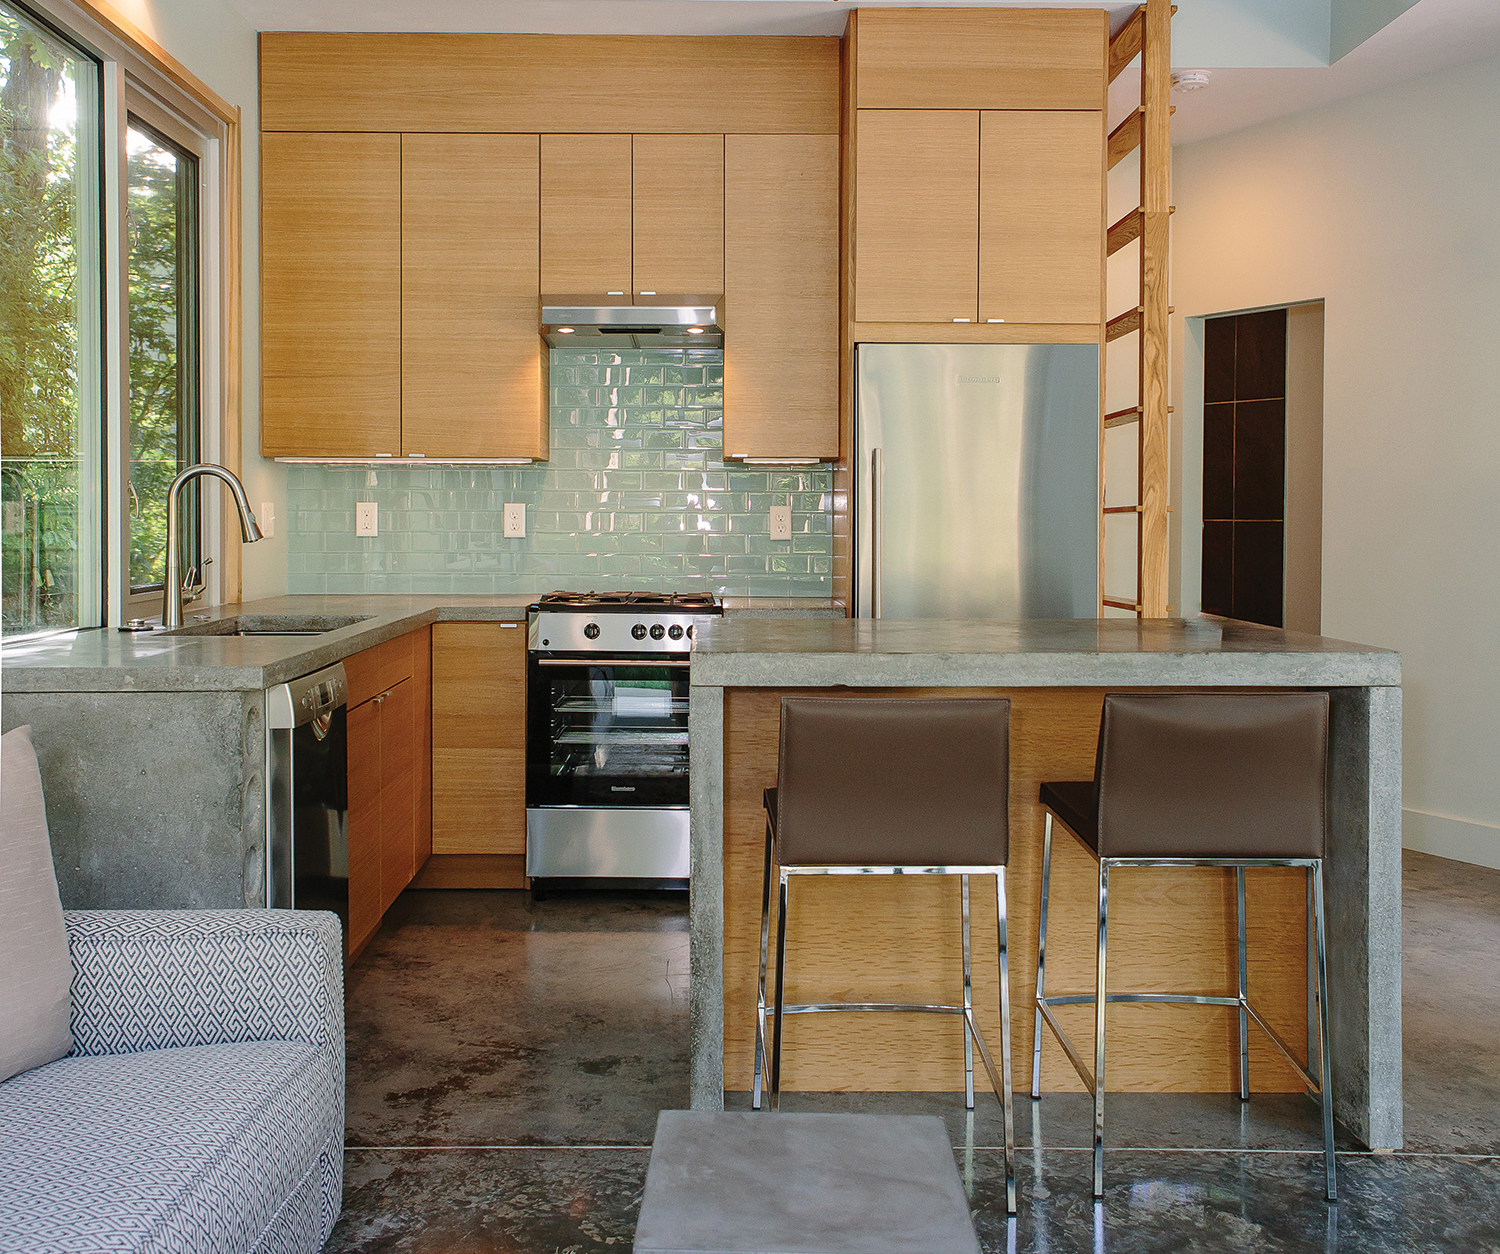 White-oak cabinetry and modern furnishings further open up the space. Photo by Tim Robison